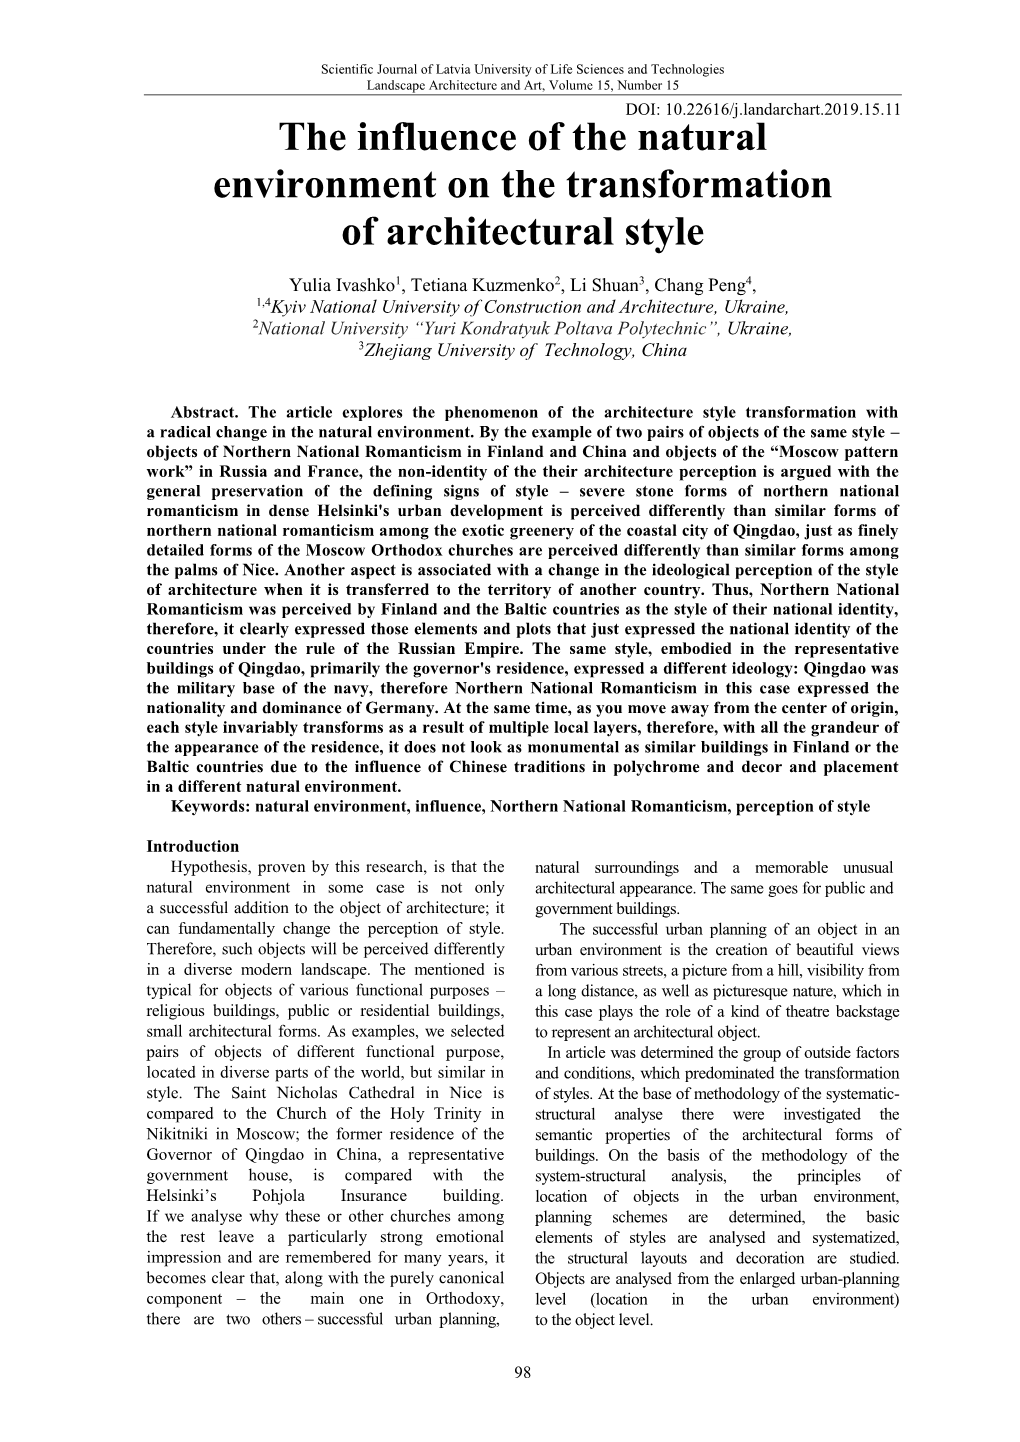 The Influence of the Natural Environment on the Transformation of Architectural Style